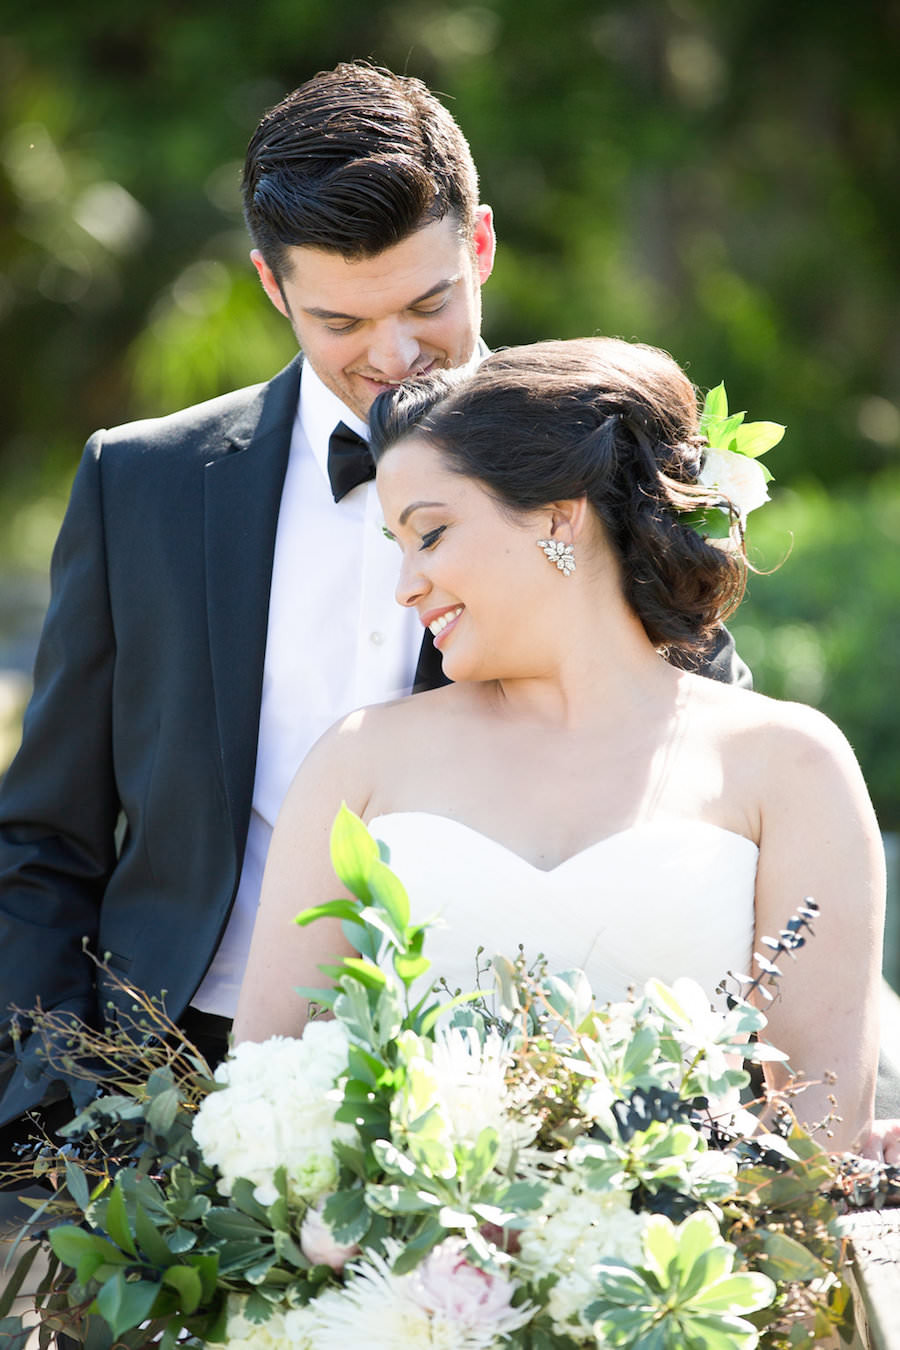 Bride and Groom Wedding Portrait | Tampa Wedding Venue Tampa Palms Golf and Country Club